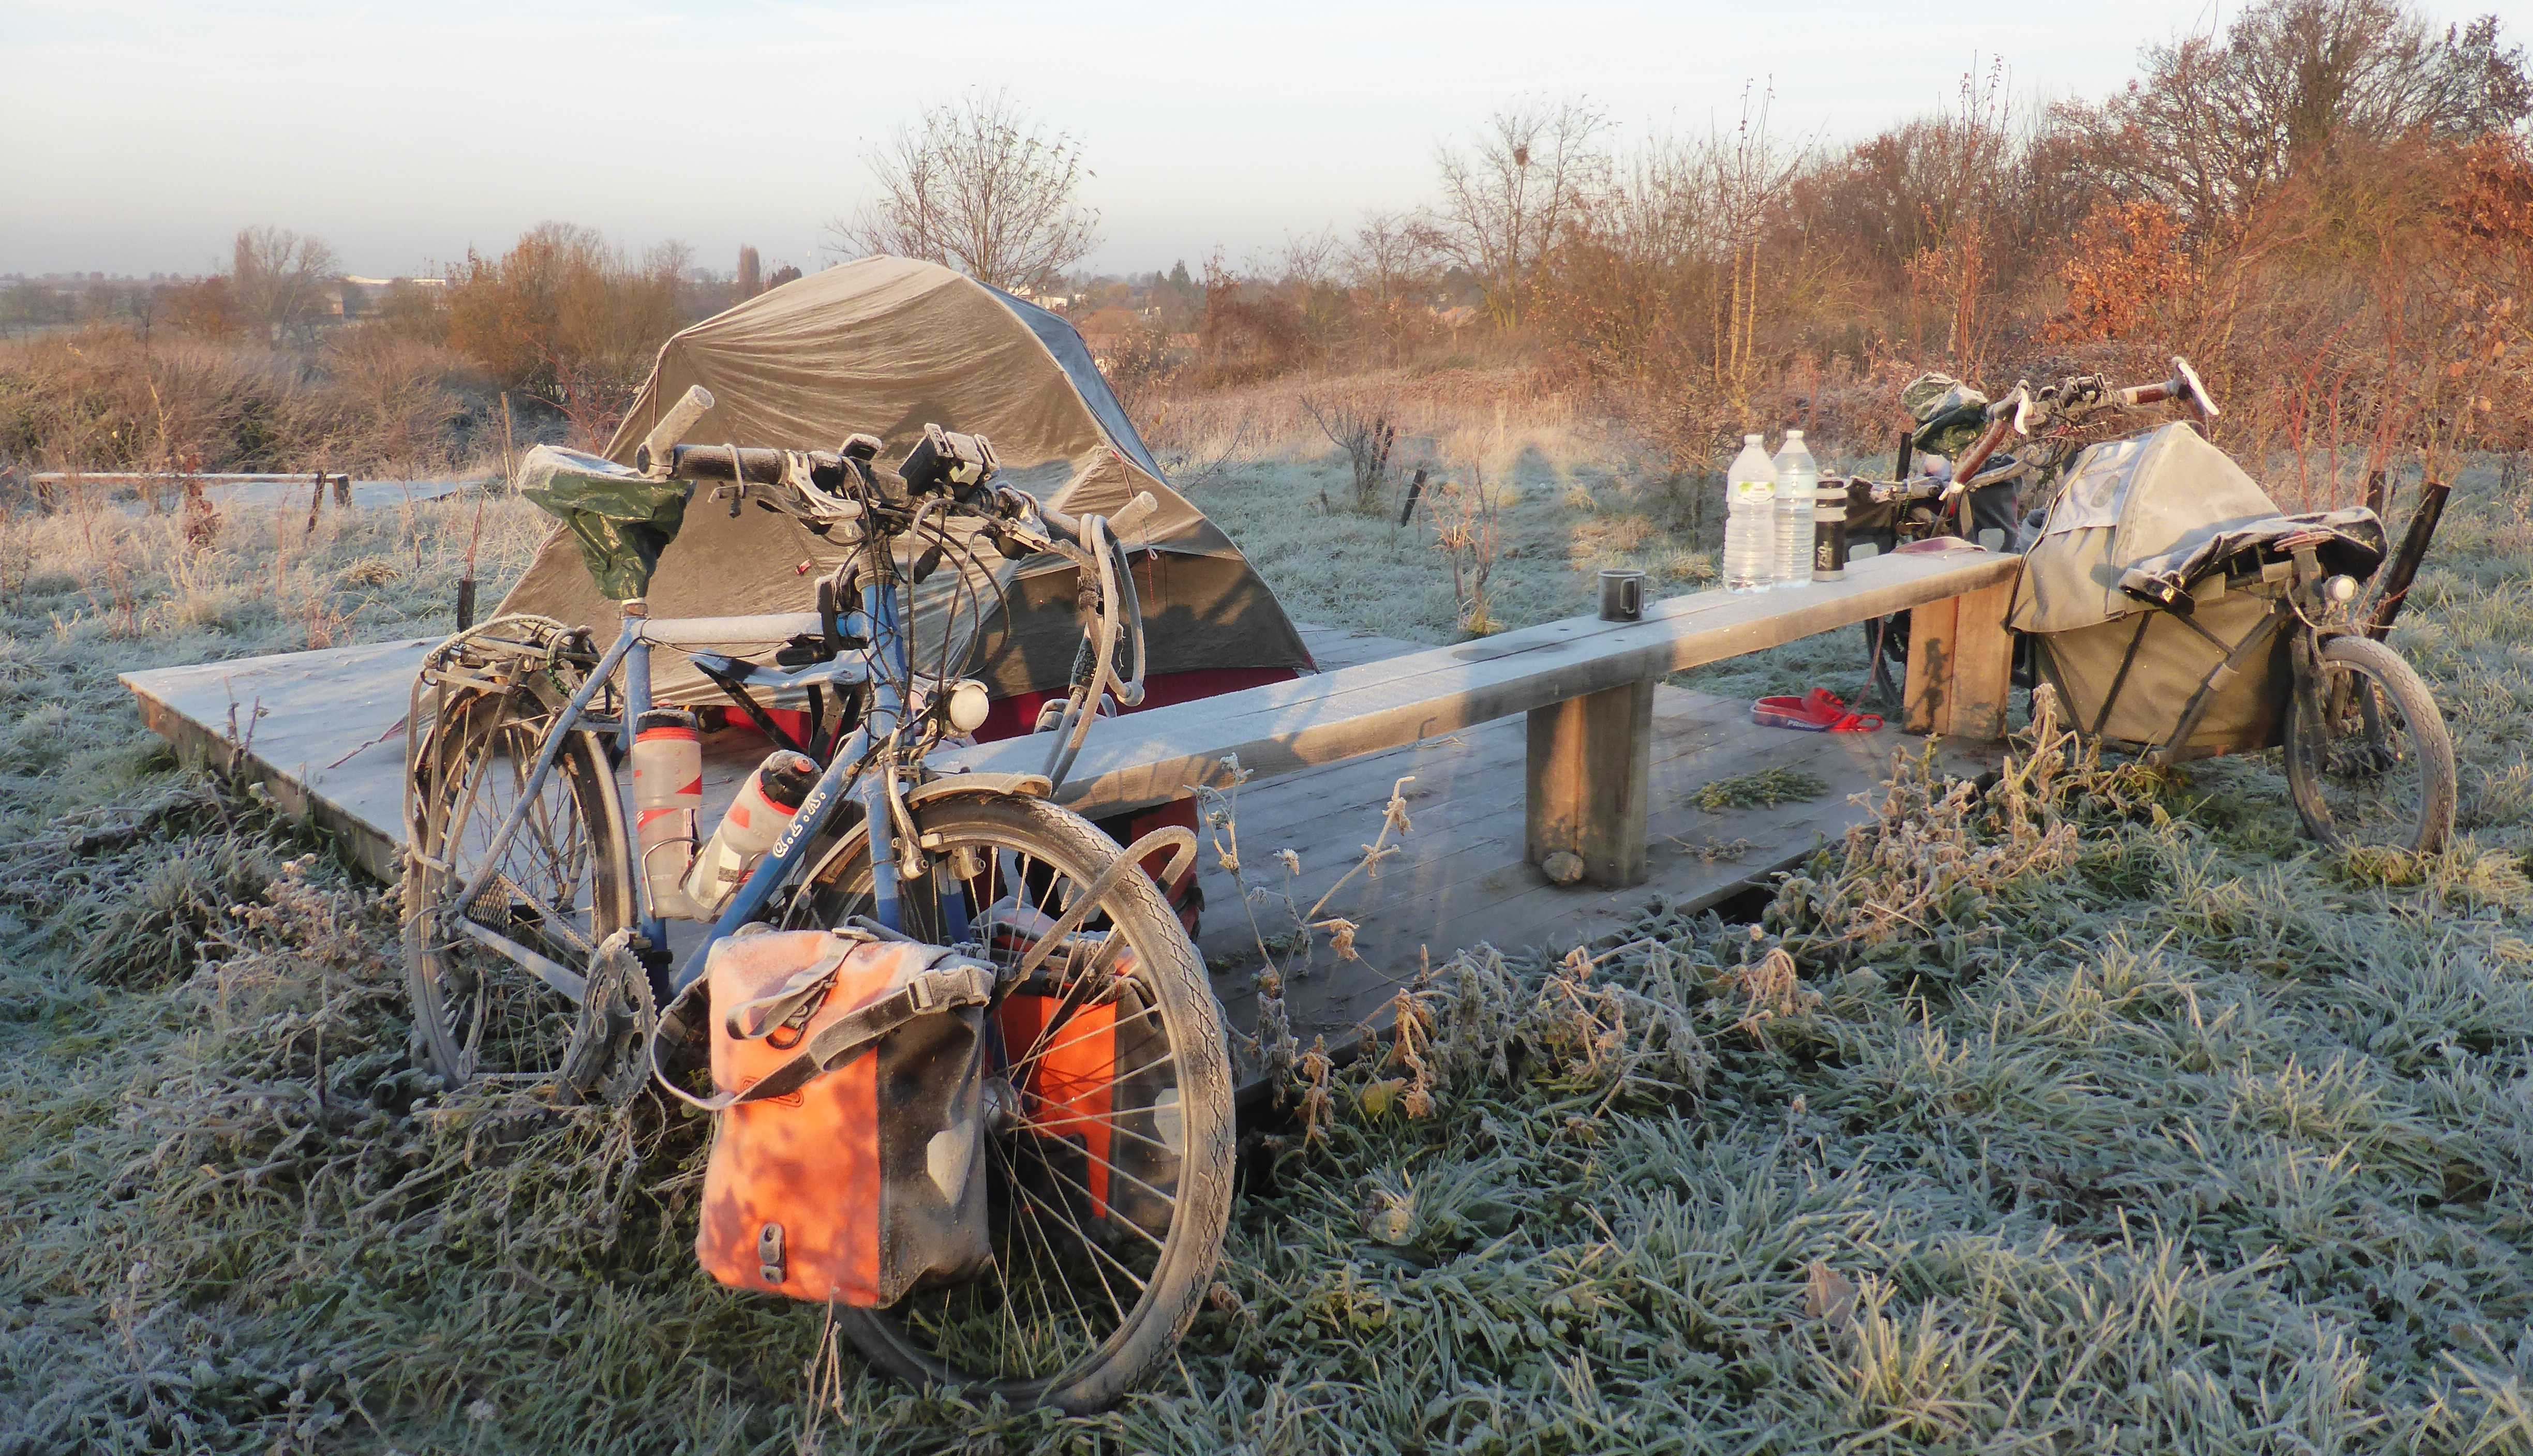 Another icy-cold camp in a field near the Belgian-Dutch border. Still no rain though!